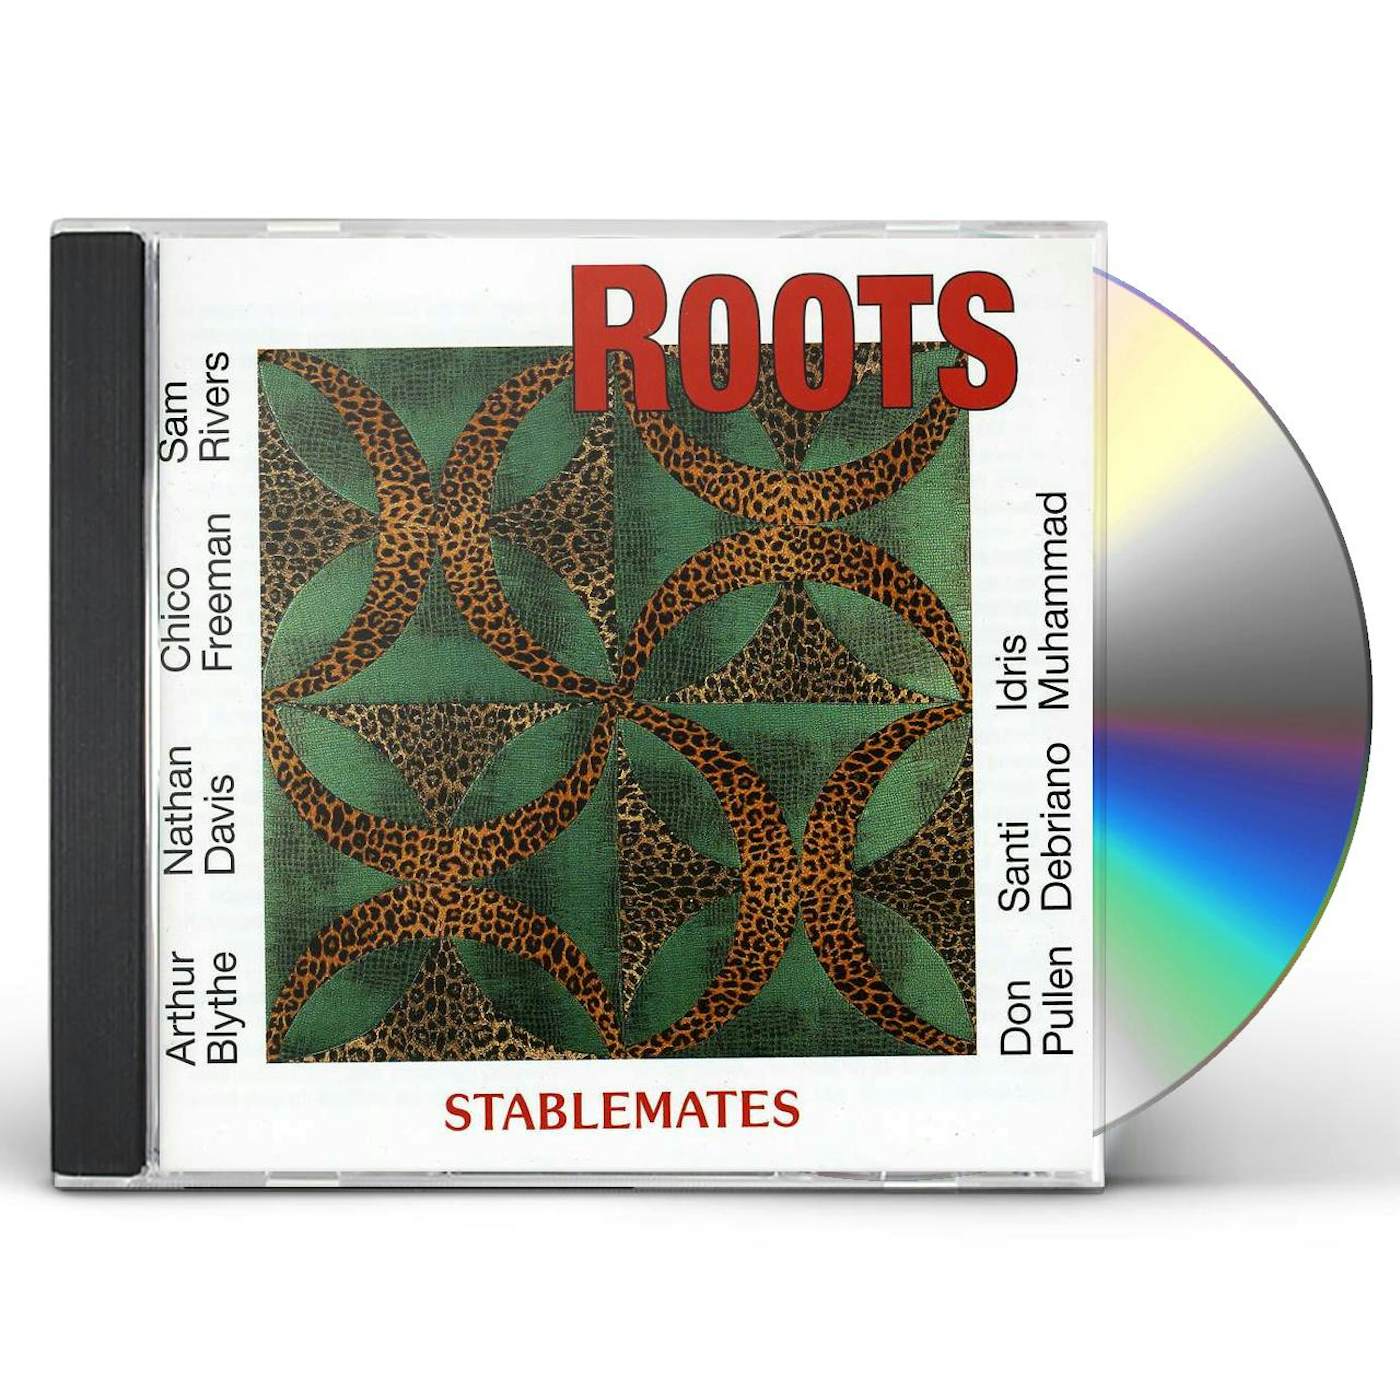 The Roots STABLEMATES CD